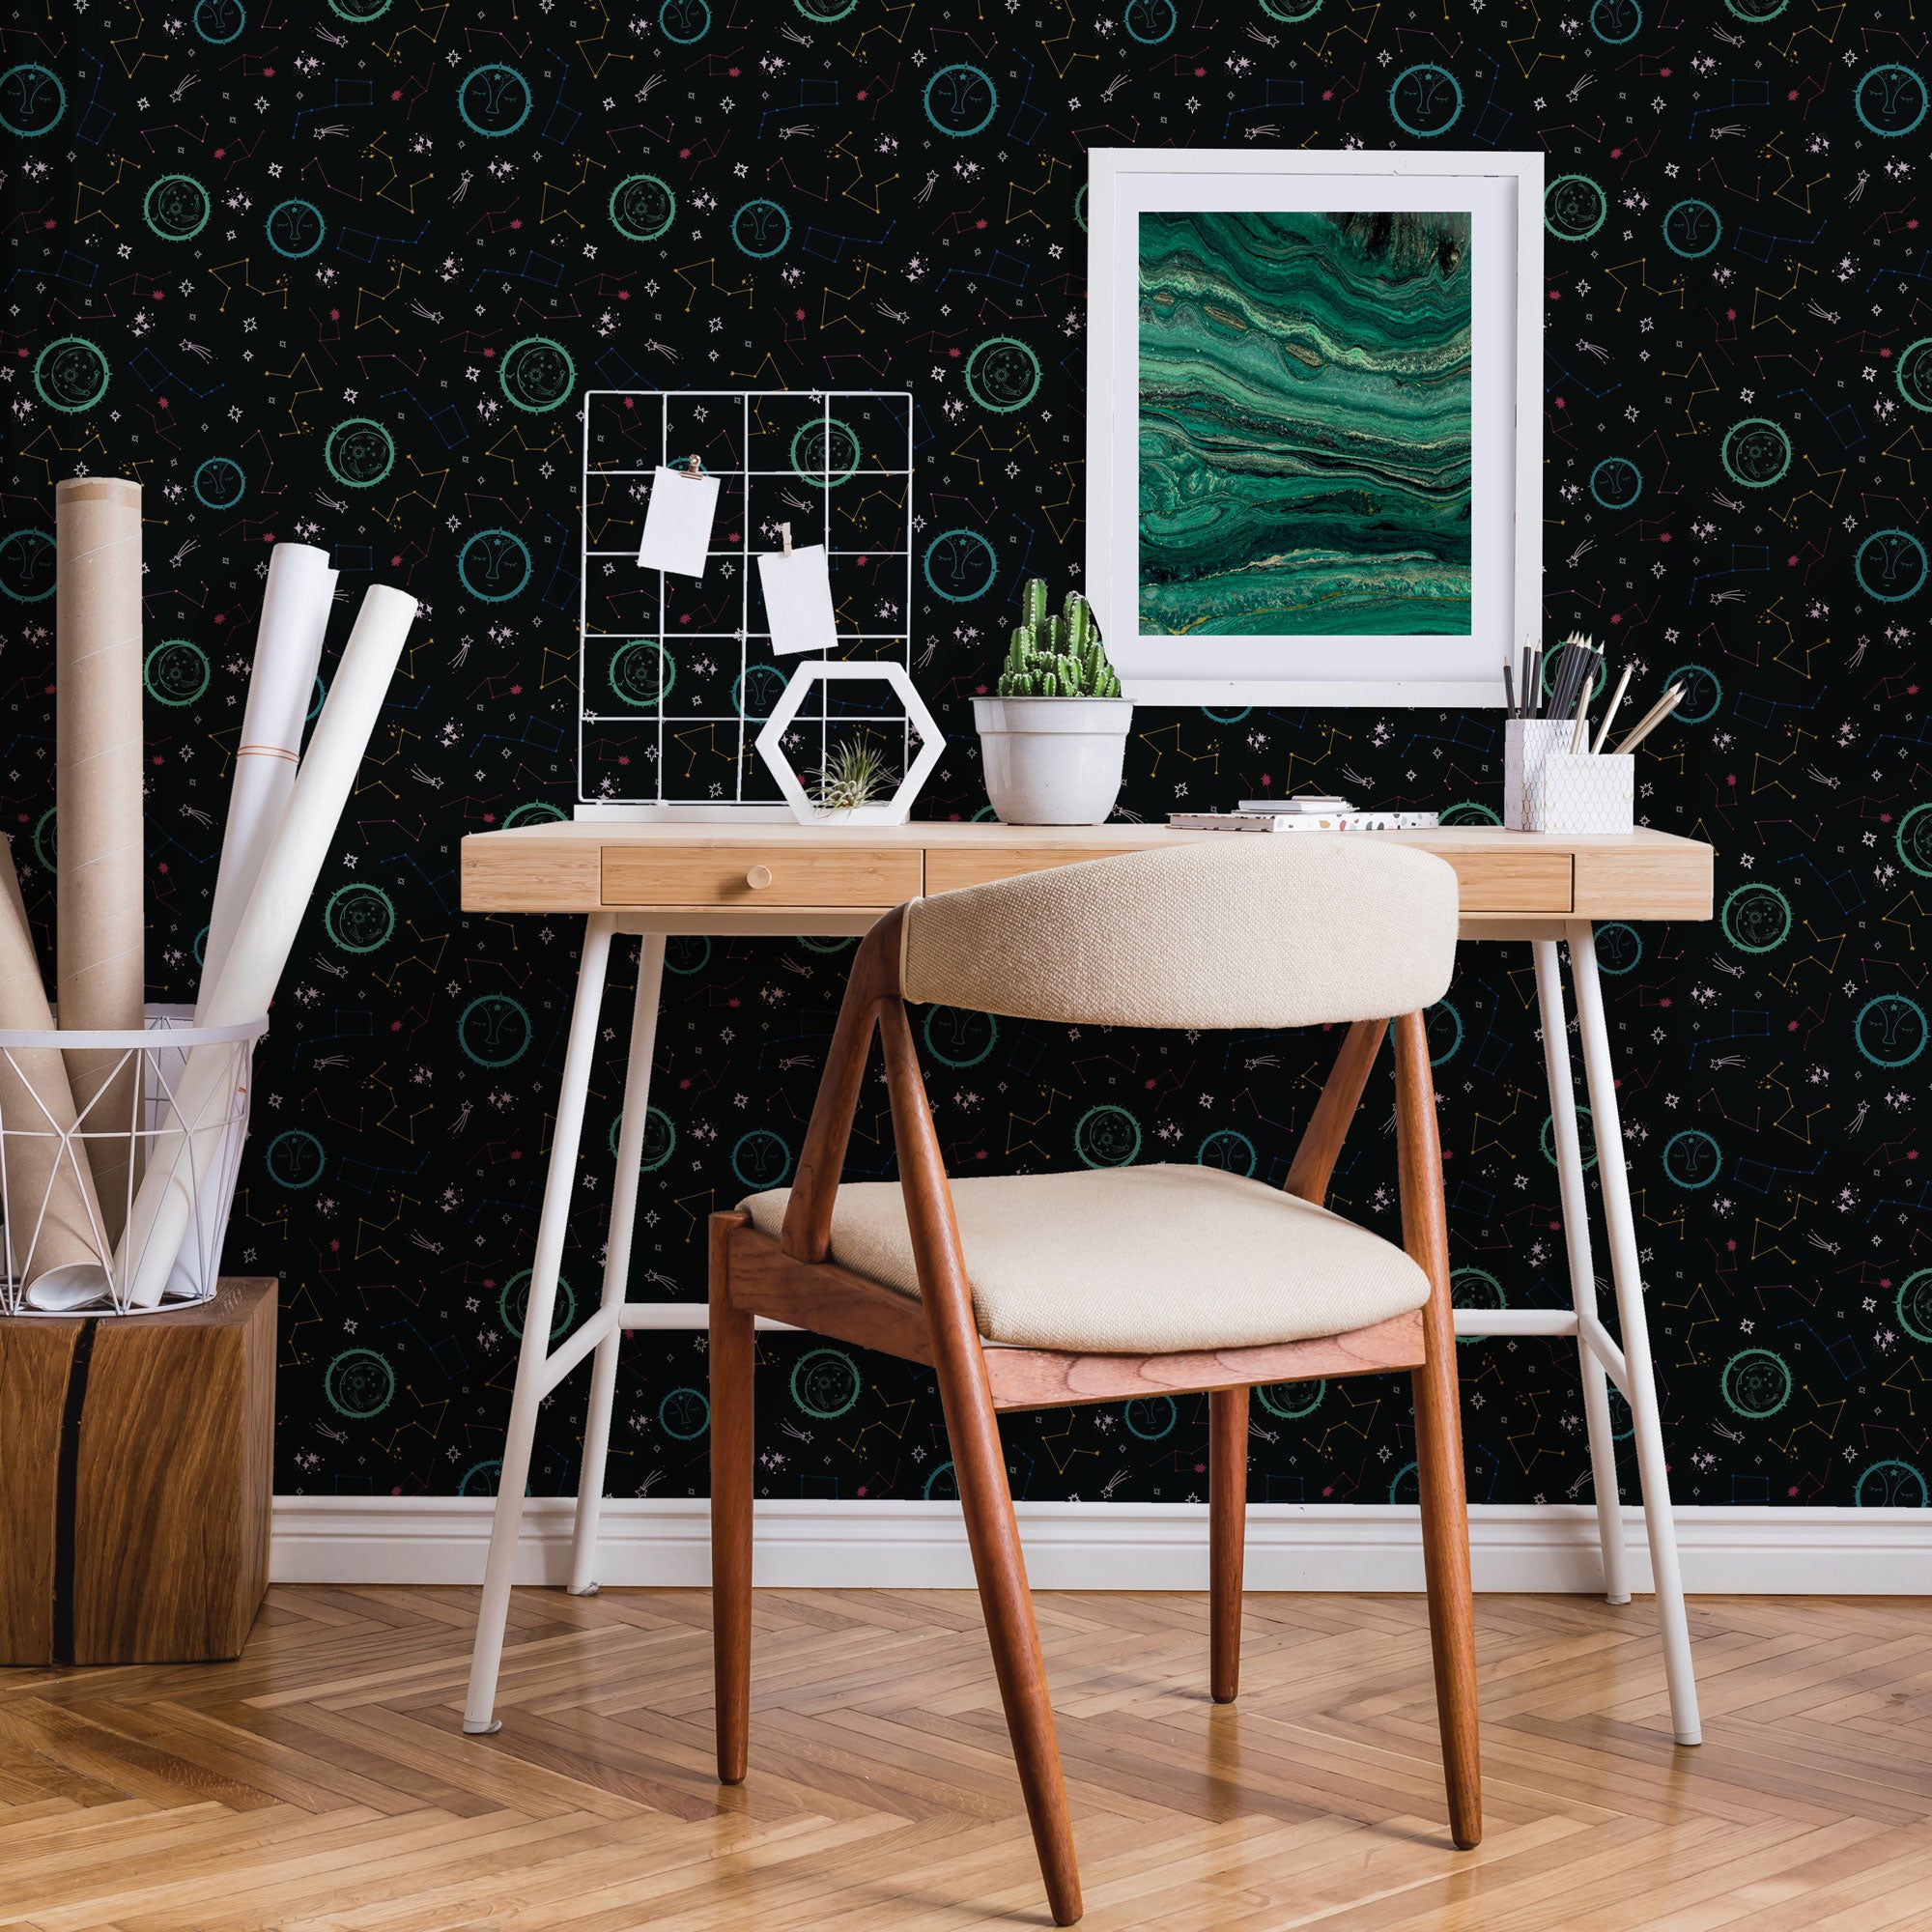 Wild Thing Wallpaper in Brights